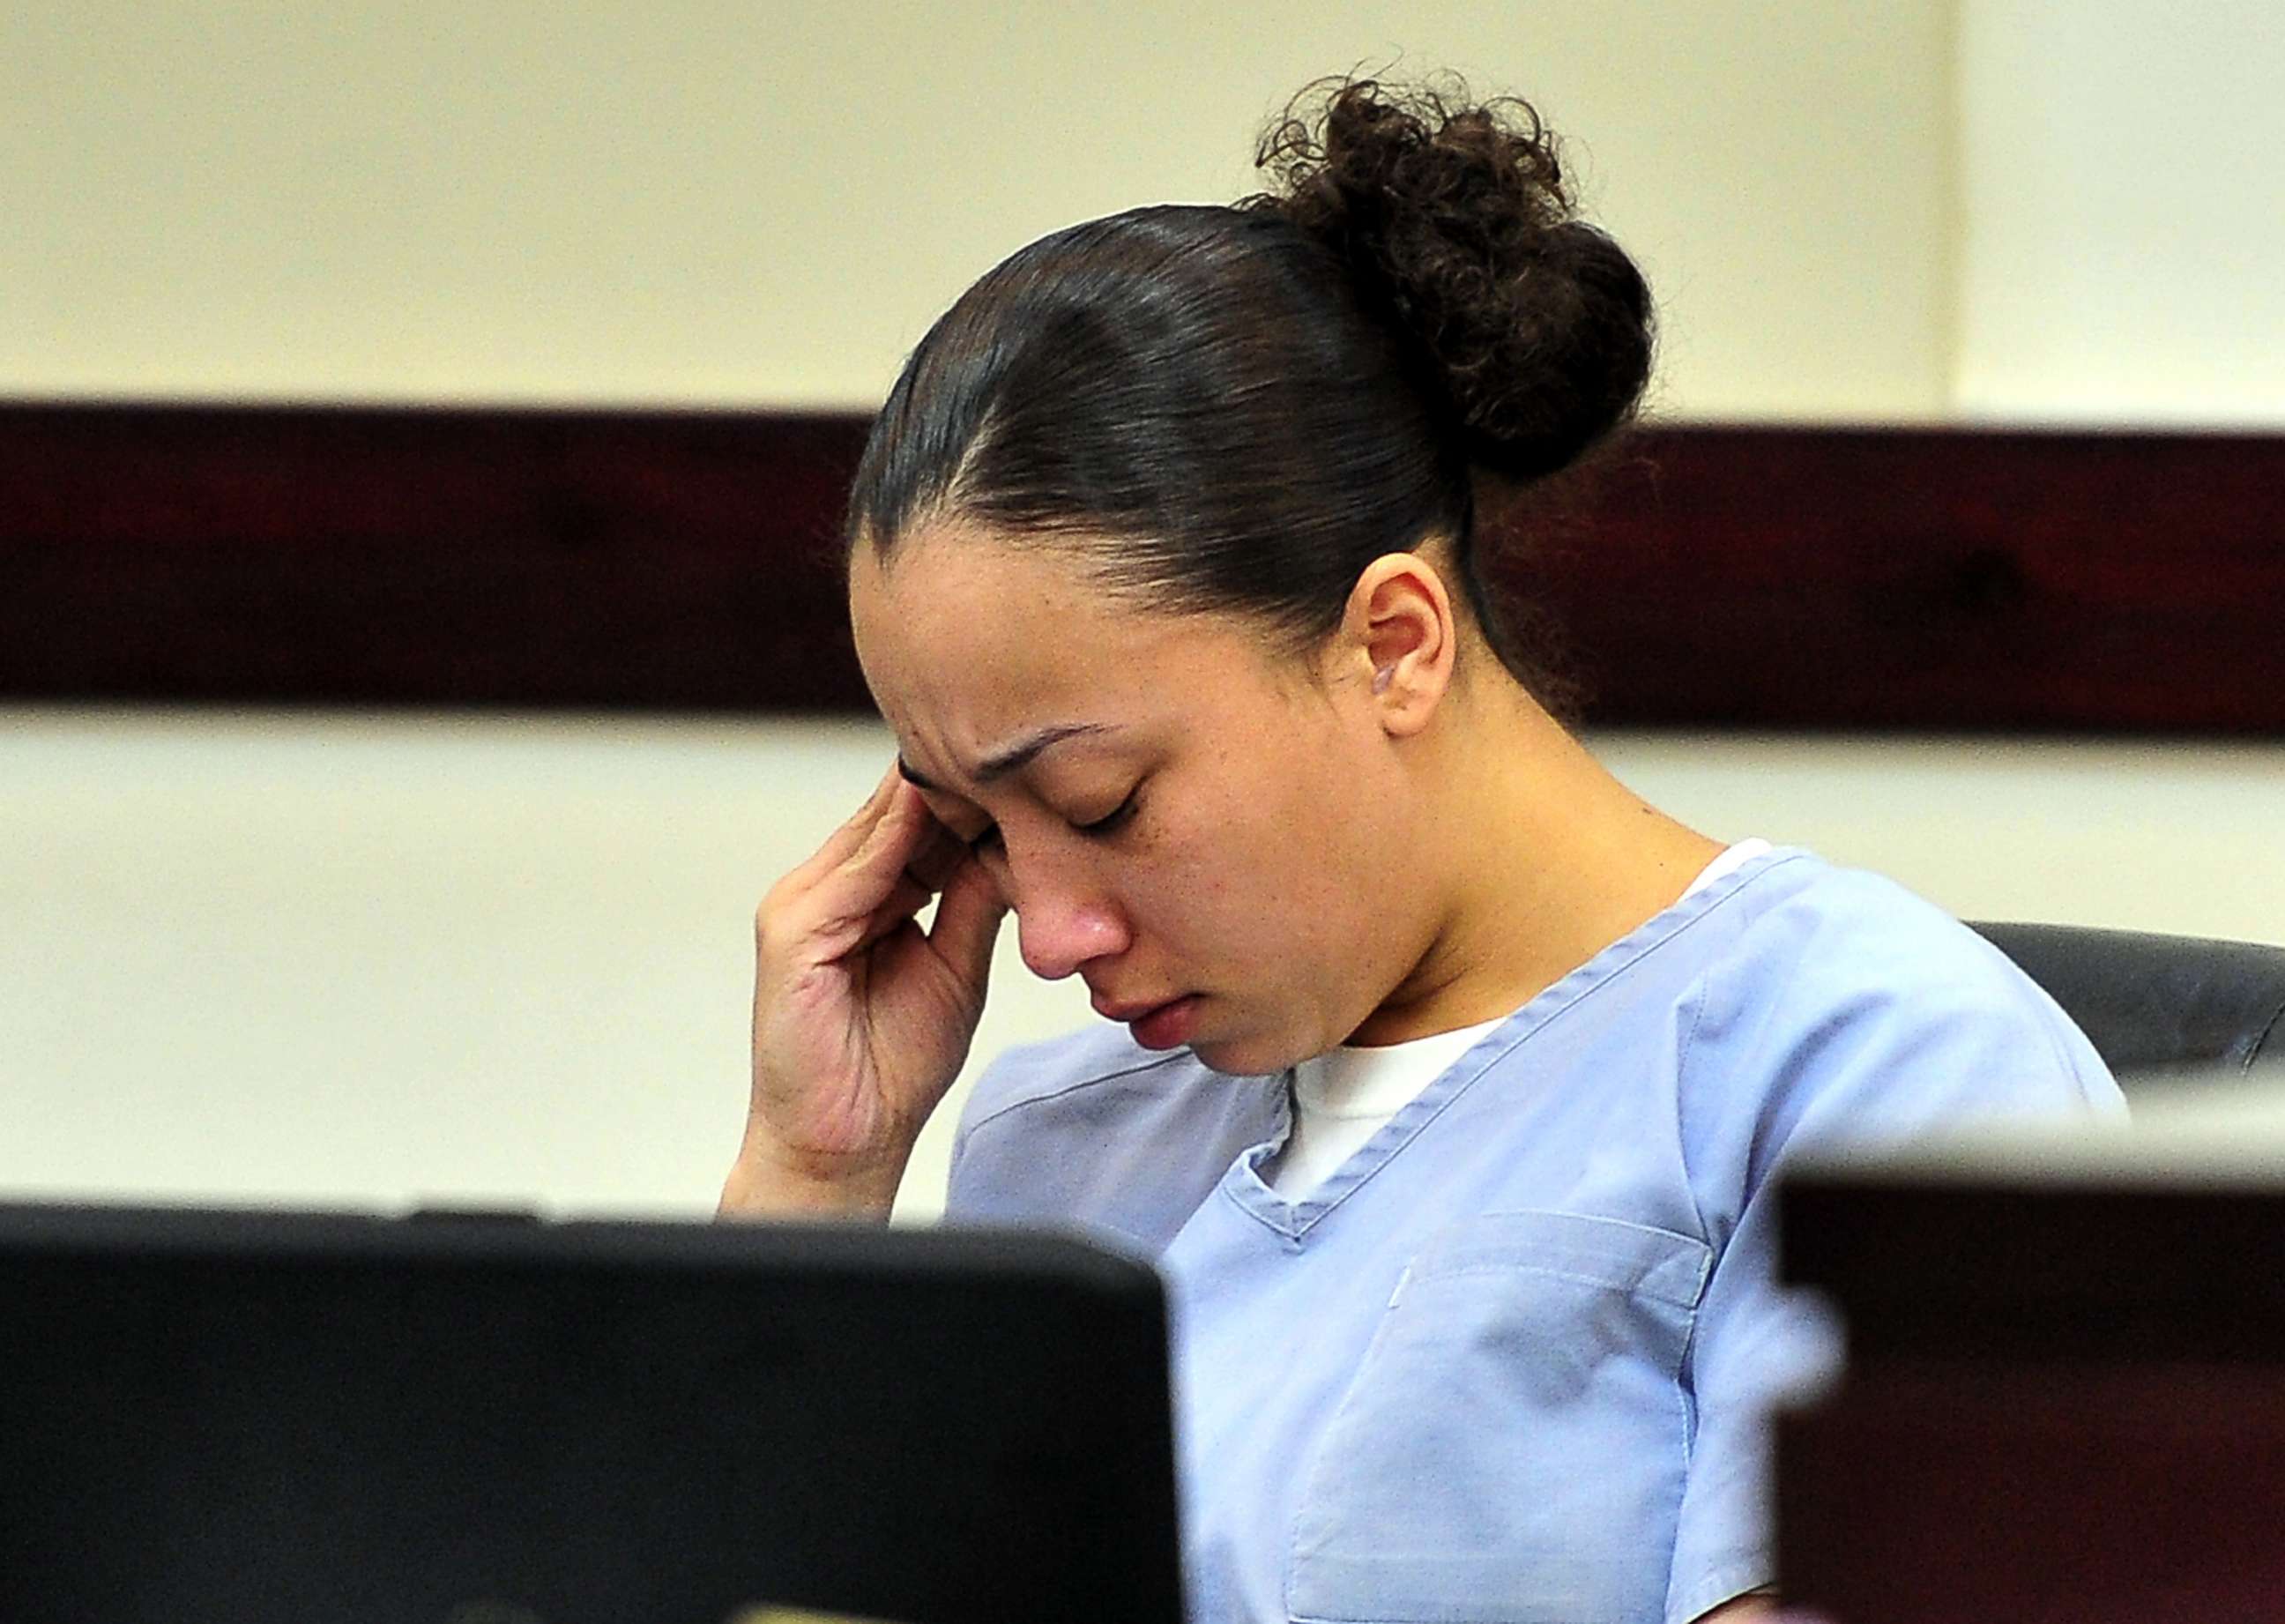 PHOTO: Cyntoia Brown was convicted of first-degree murder in 2006, when she was 16.